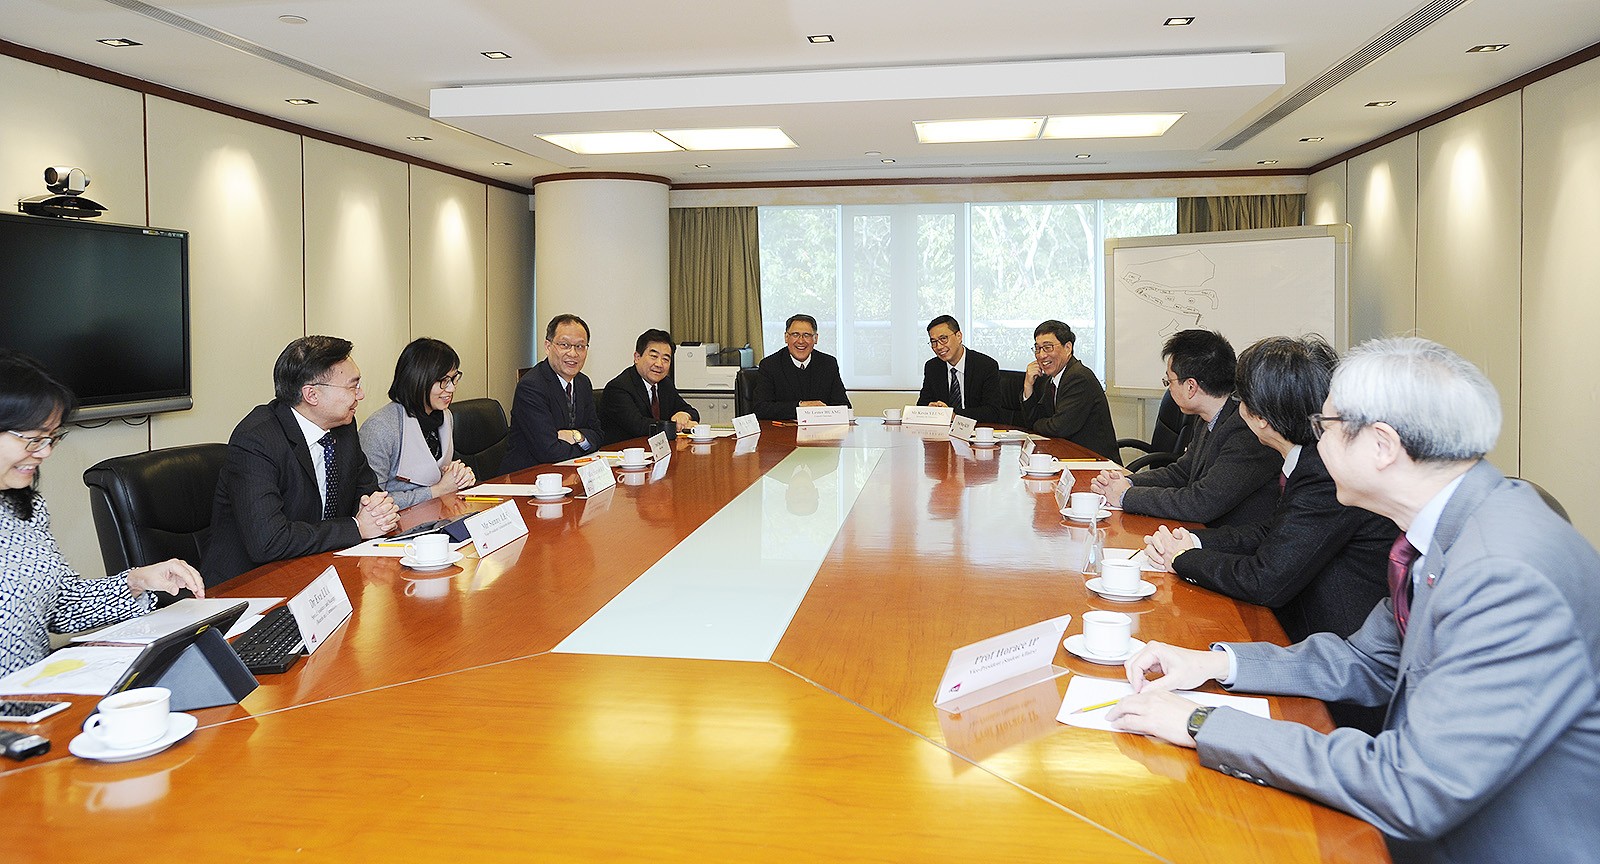 Mr Kevin Yeung Yun-hung (5th from right) was briefed on CityU’s latest developments by Mr Lester Garson Huang (6th from left) and Professor Way Kuo (4th from right) and other senior management.